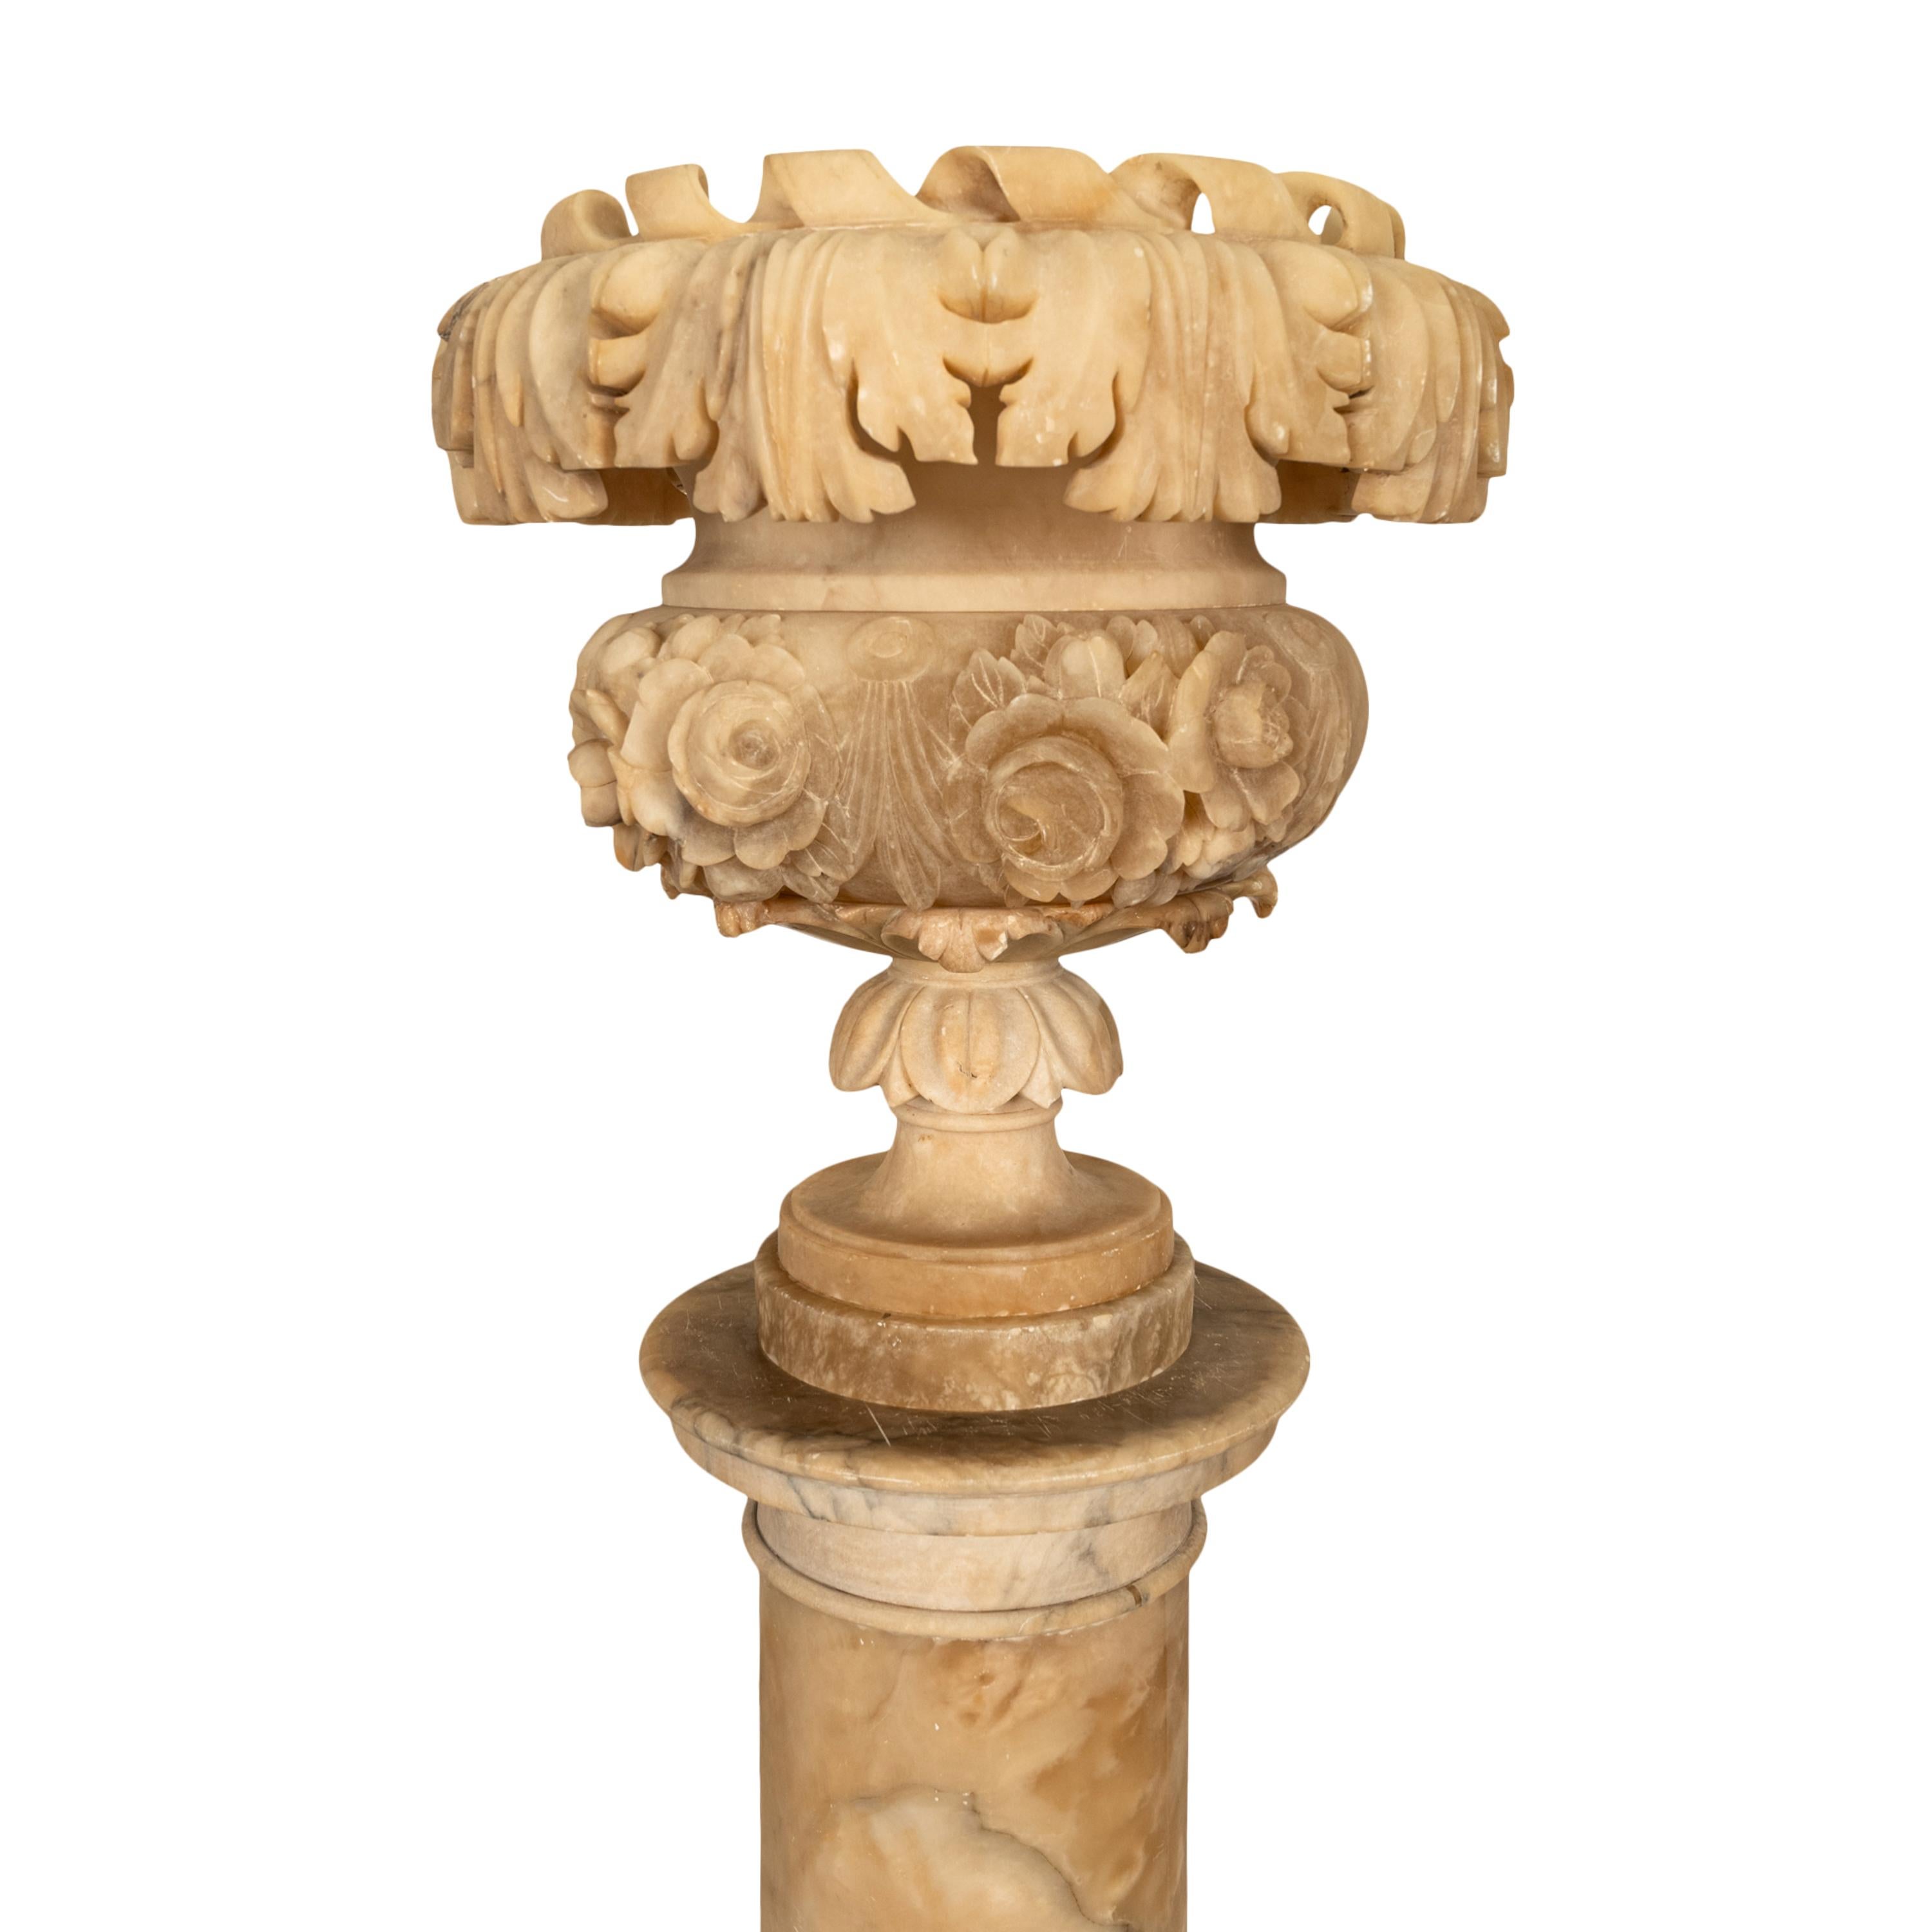 Antique 19th Century Italian Carved Alabaster Neoclassical Urn on Pedestal 1850 For Sale 13